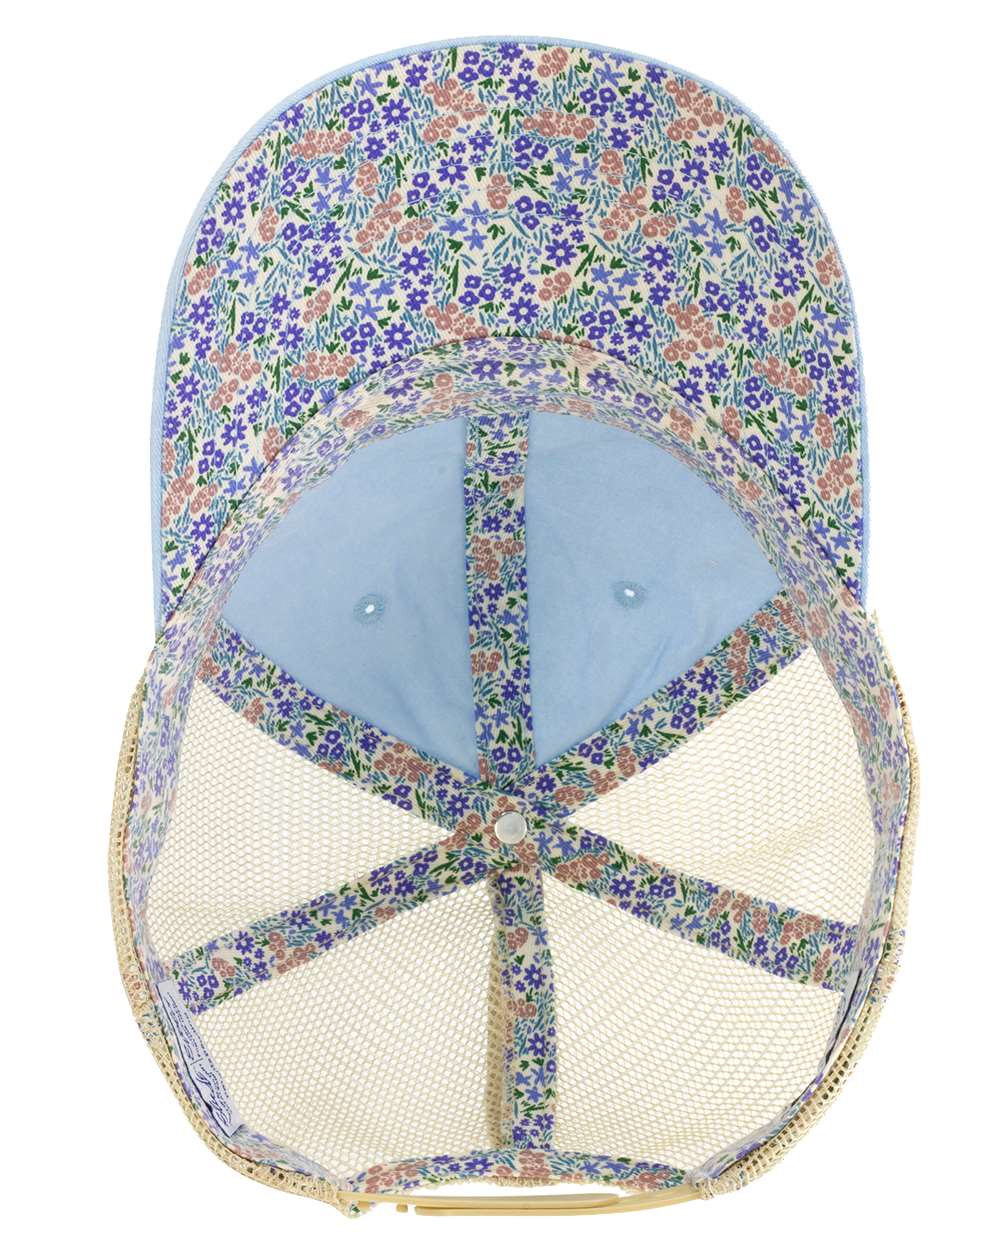 A women's washed mesh-back cap in cashmere blue with floral pattern on the front panel.